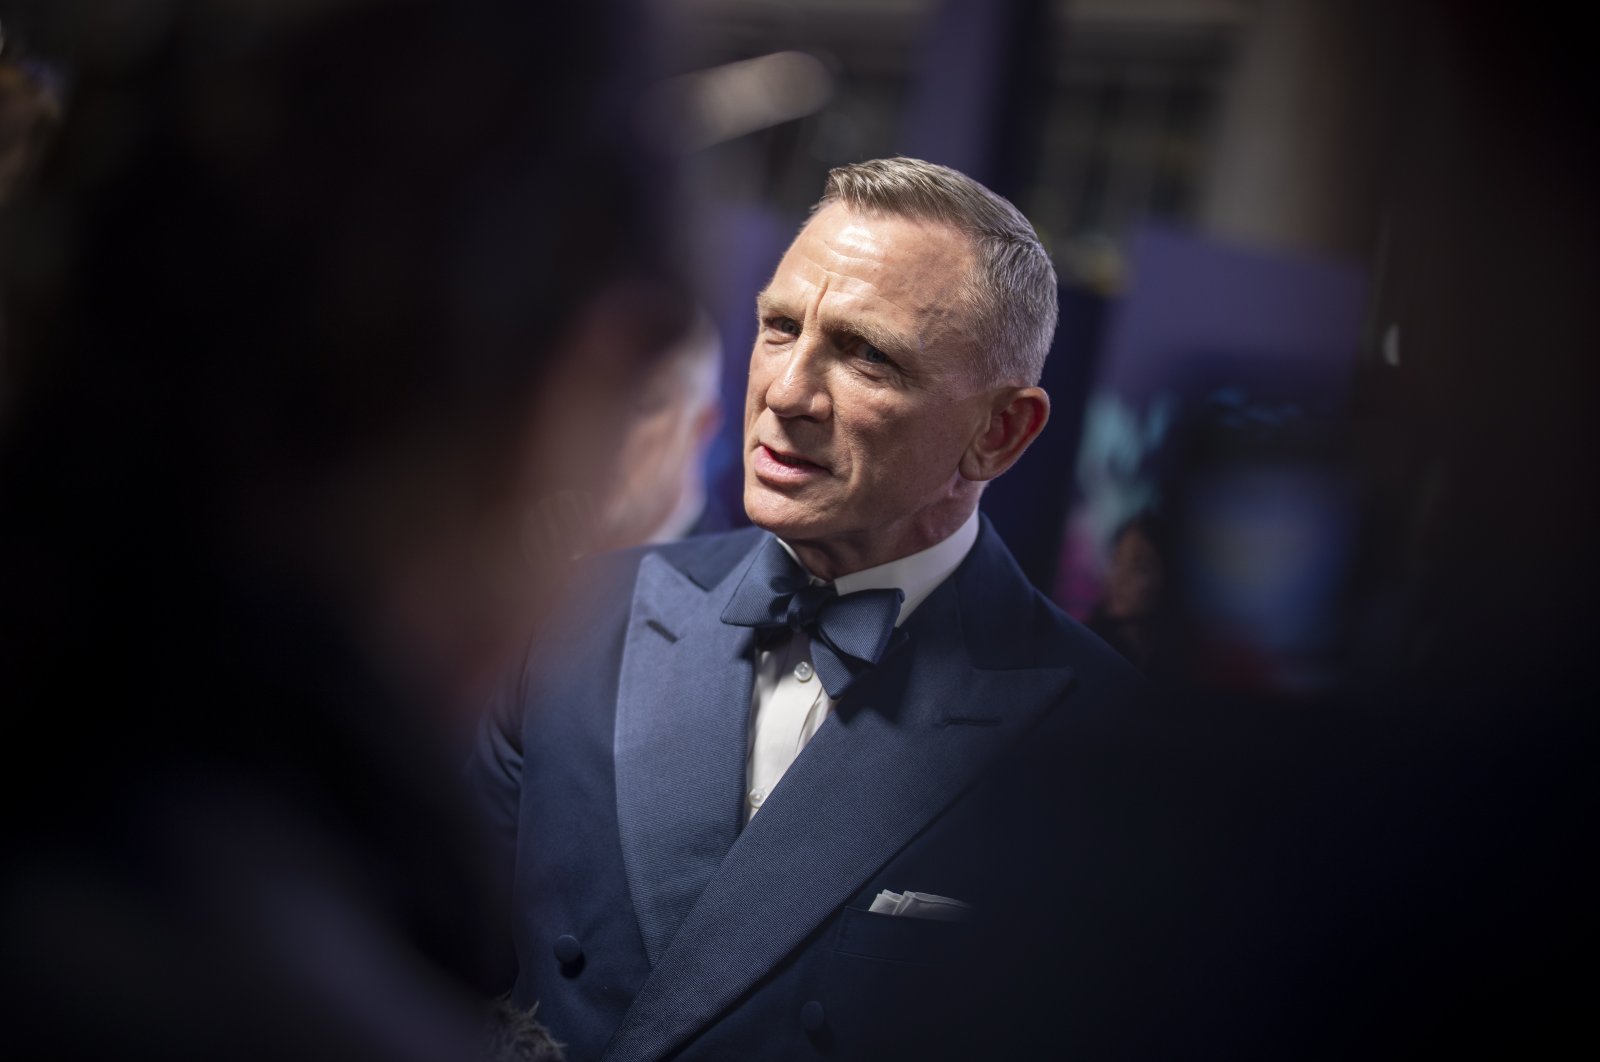 English actor Daniel Craig poses on the red carpet for the &quot;Glass Onion: A Knives Out Mystery&quot; premiere during the closing gala of the BFI London Film Festival in London, U.K., Oct. 16, 2022. (EPA Photo)